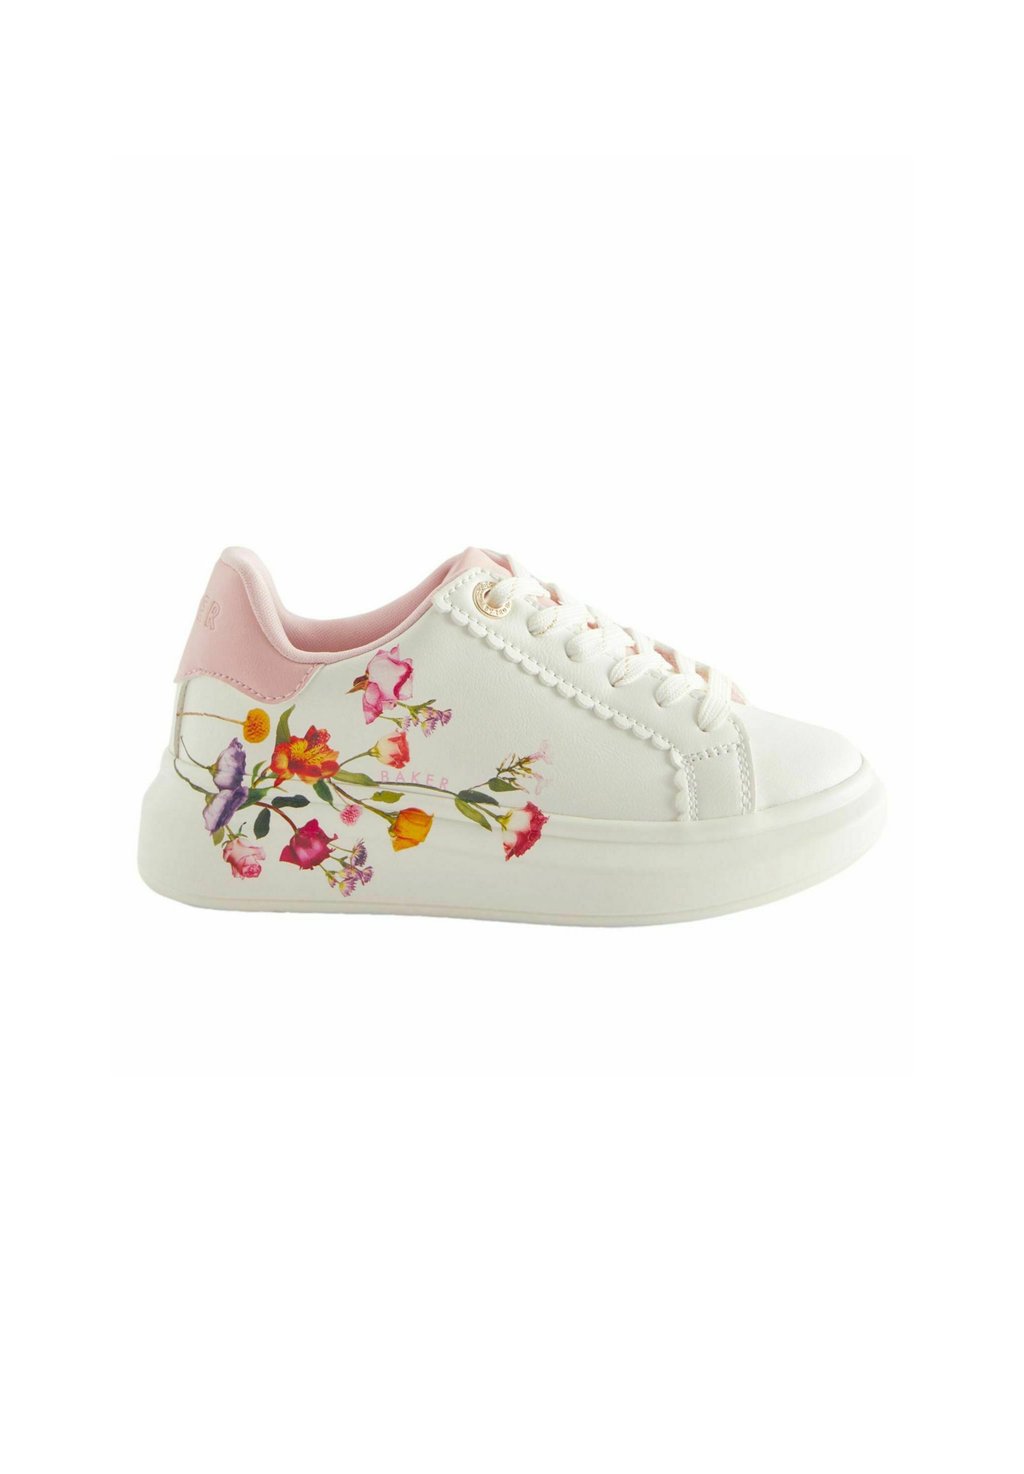 Кроссовки низкие FLORAL CHUNKY REGULAR FIT Baker by Ted Baker, цвет white